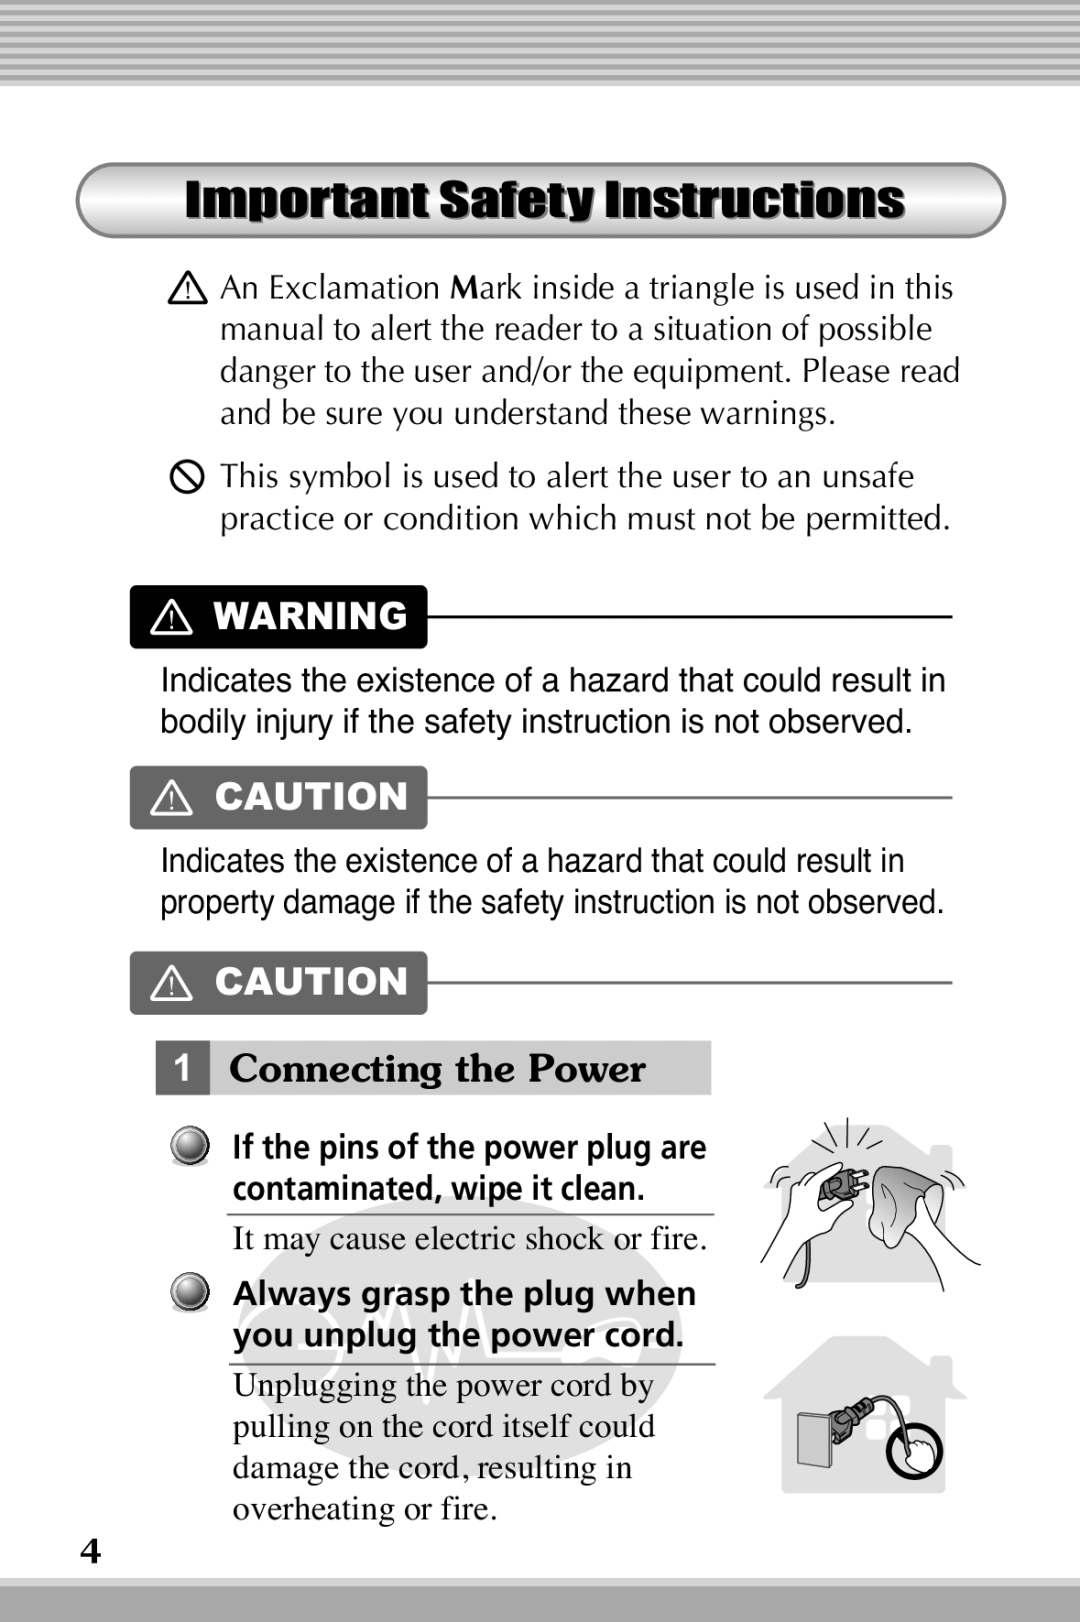 LG Electronics RLM20K, RLM10 Important Safety Instructions, Connecting the Power, It may cause electric shock or fire 